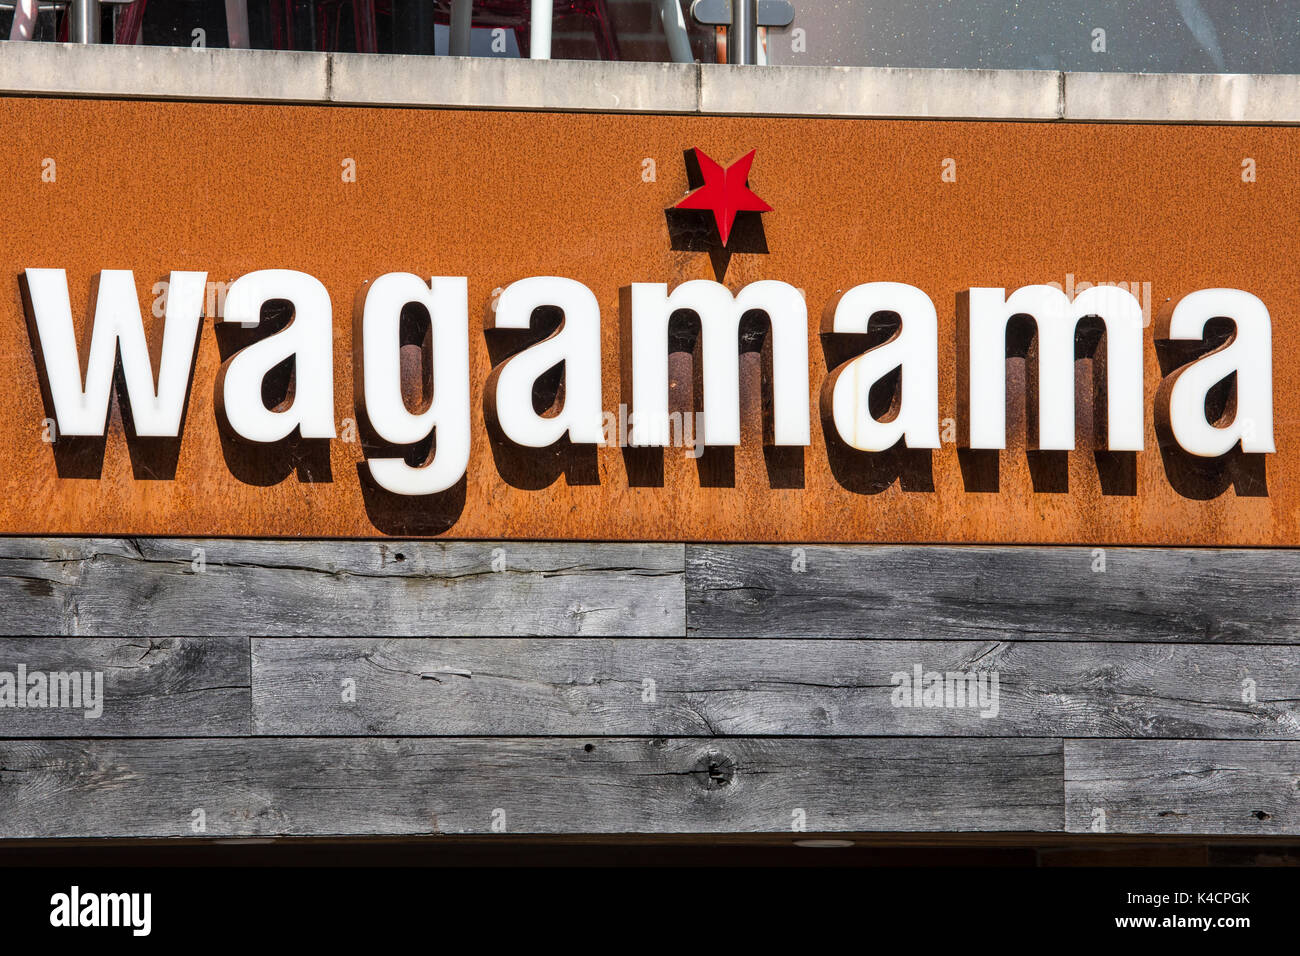 DORCHESTER, UK - AUGUST 15TH 2017: The sign above a Wagamama Asian food restaurant in Dorchester, UK, on 15th August 2017. Stock Photo